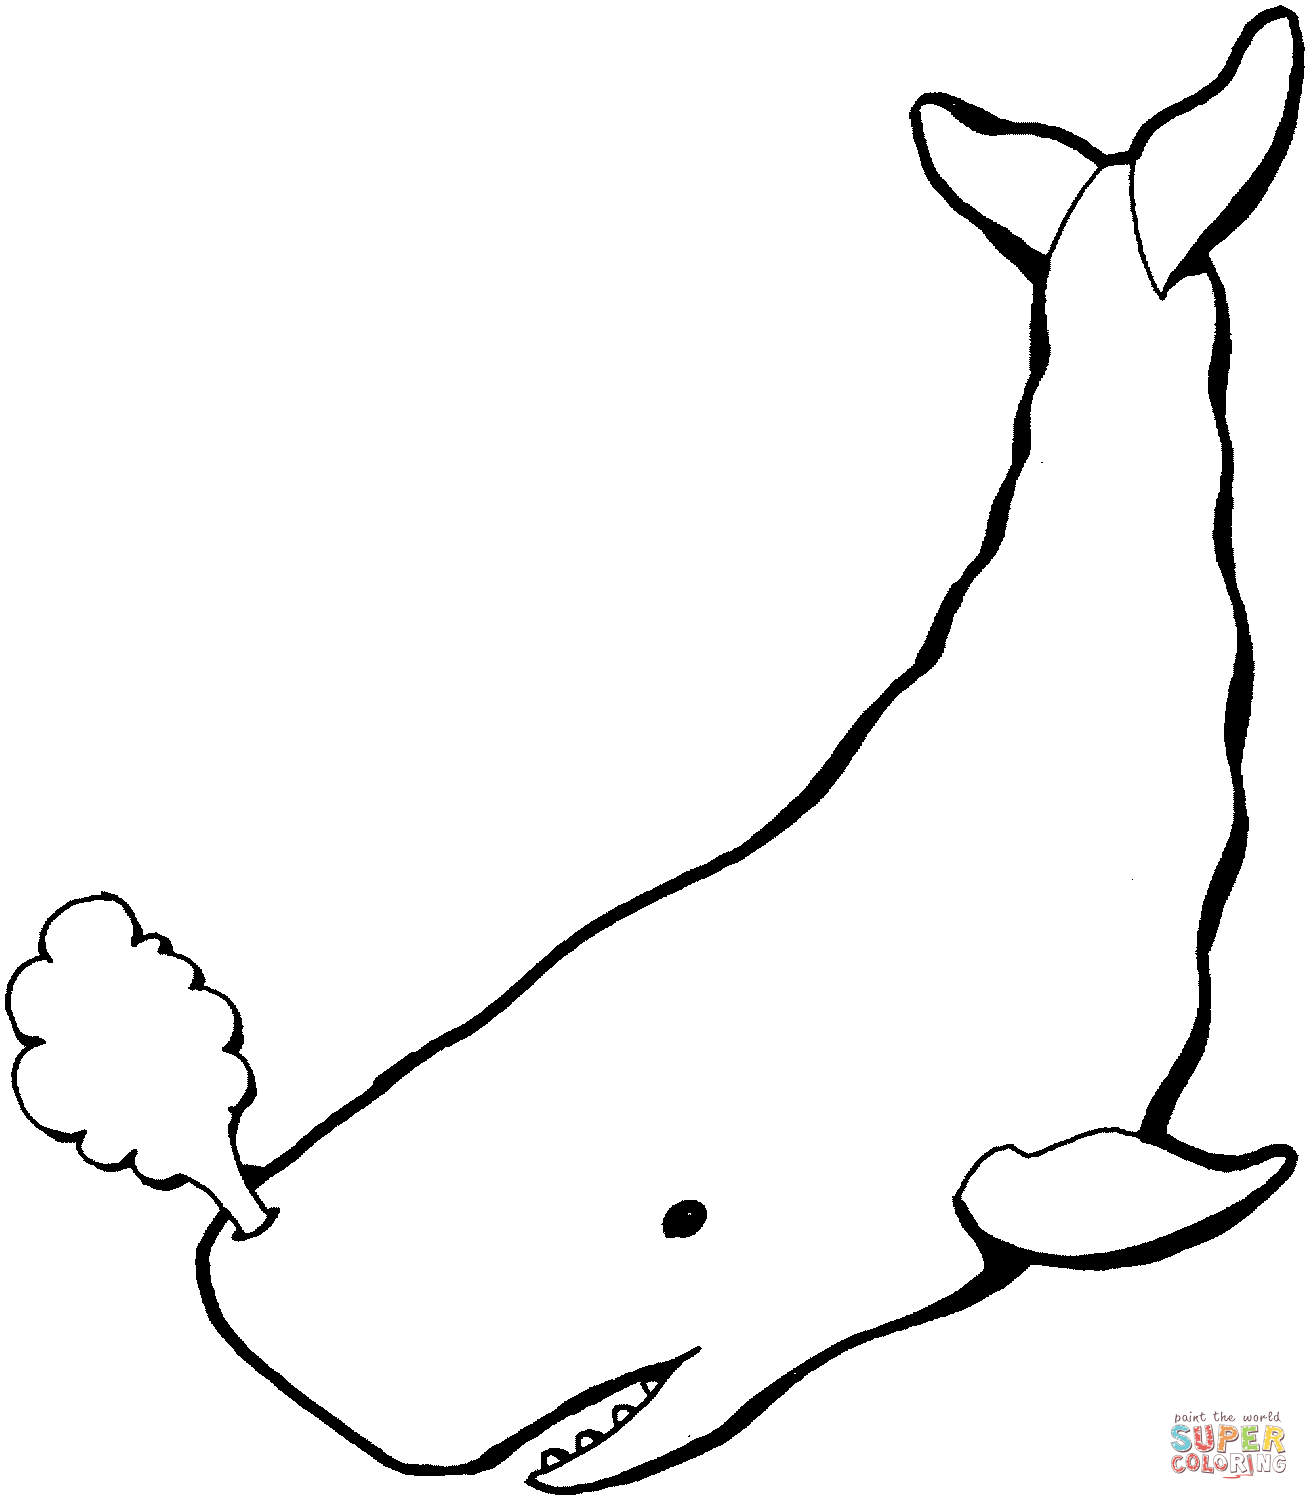 Sperm Whale coloring page | Free Printable Coloring Pages